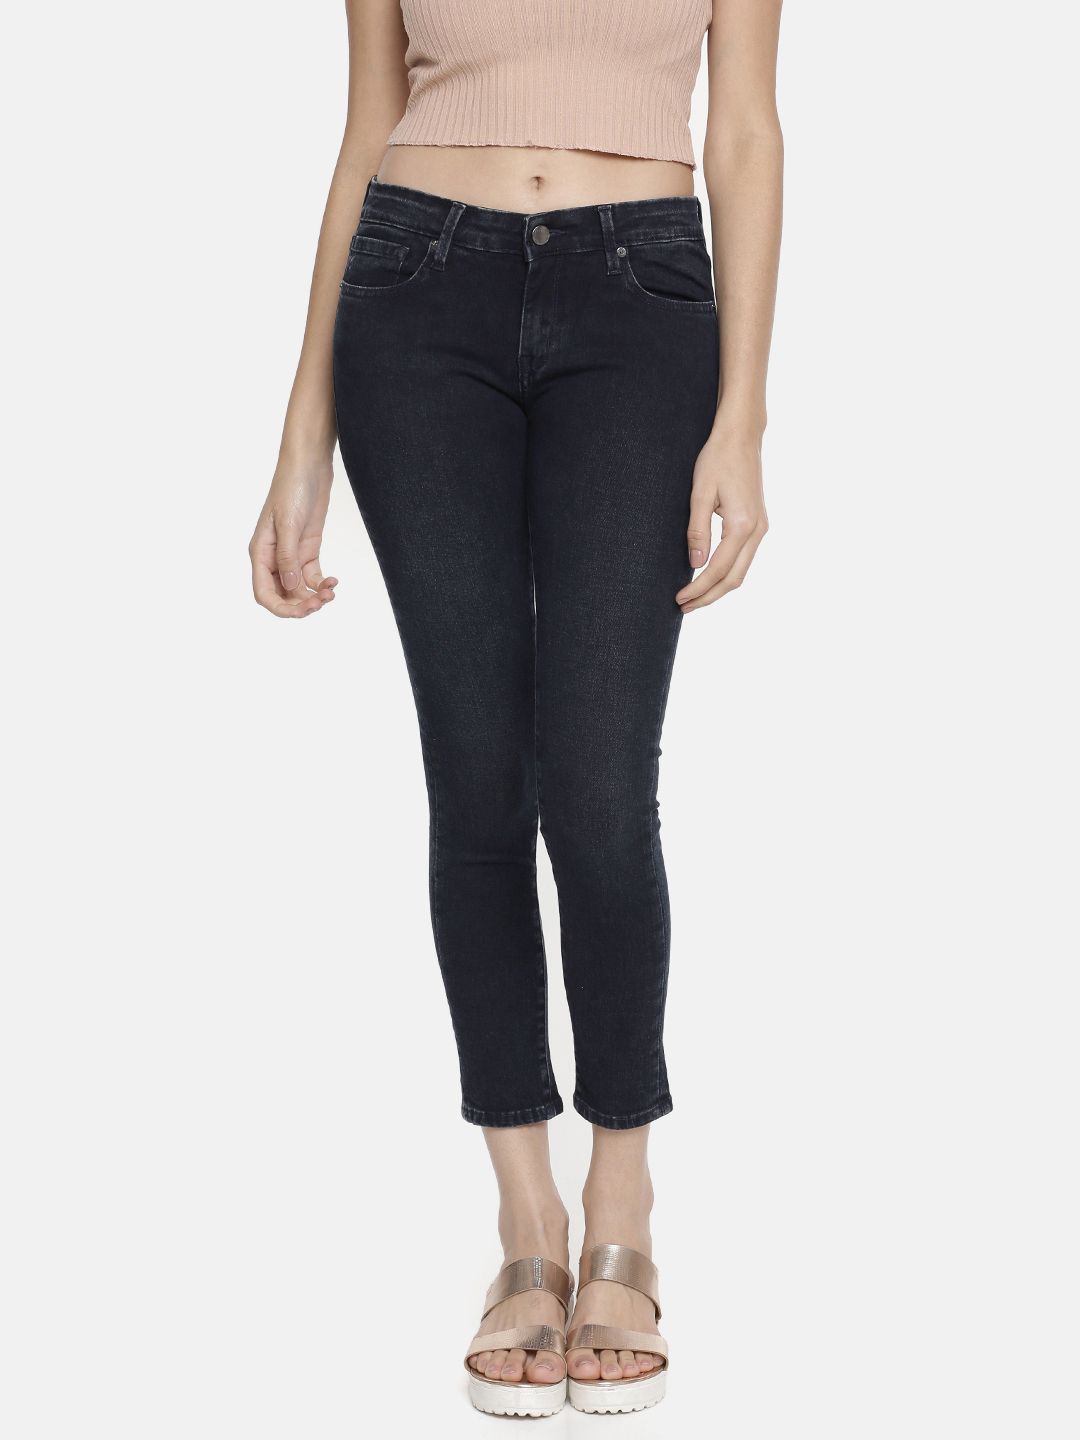 SPYKAR Women Alicia Blue Super Skinny Fit Mid-Rise Clean Look Stretchable Jeans Price in India